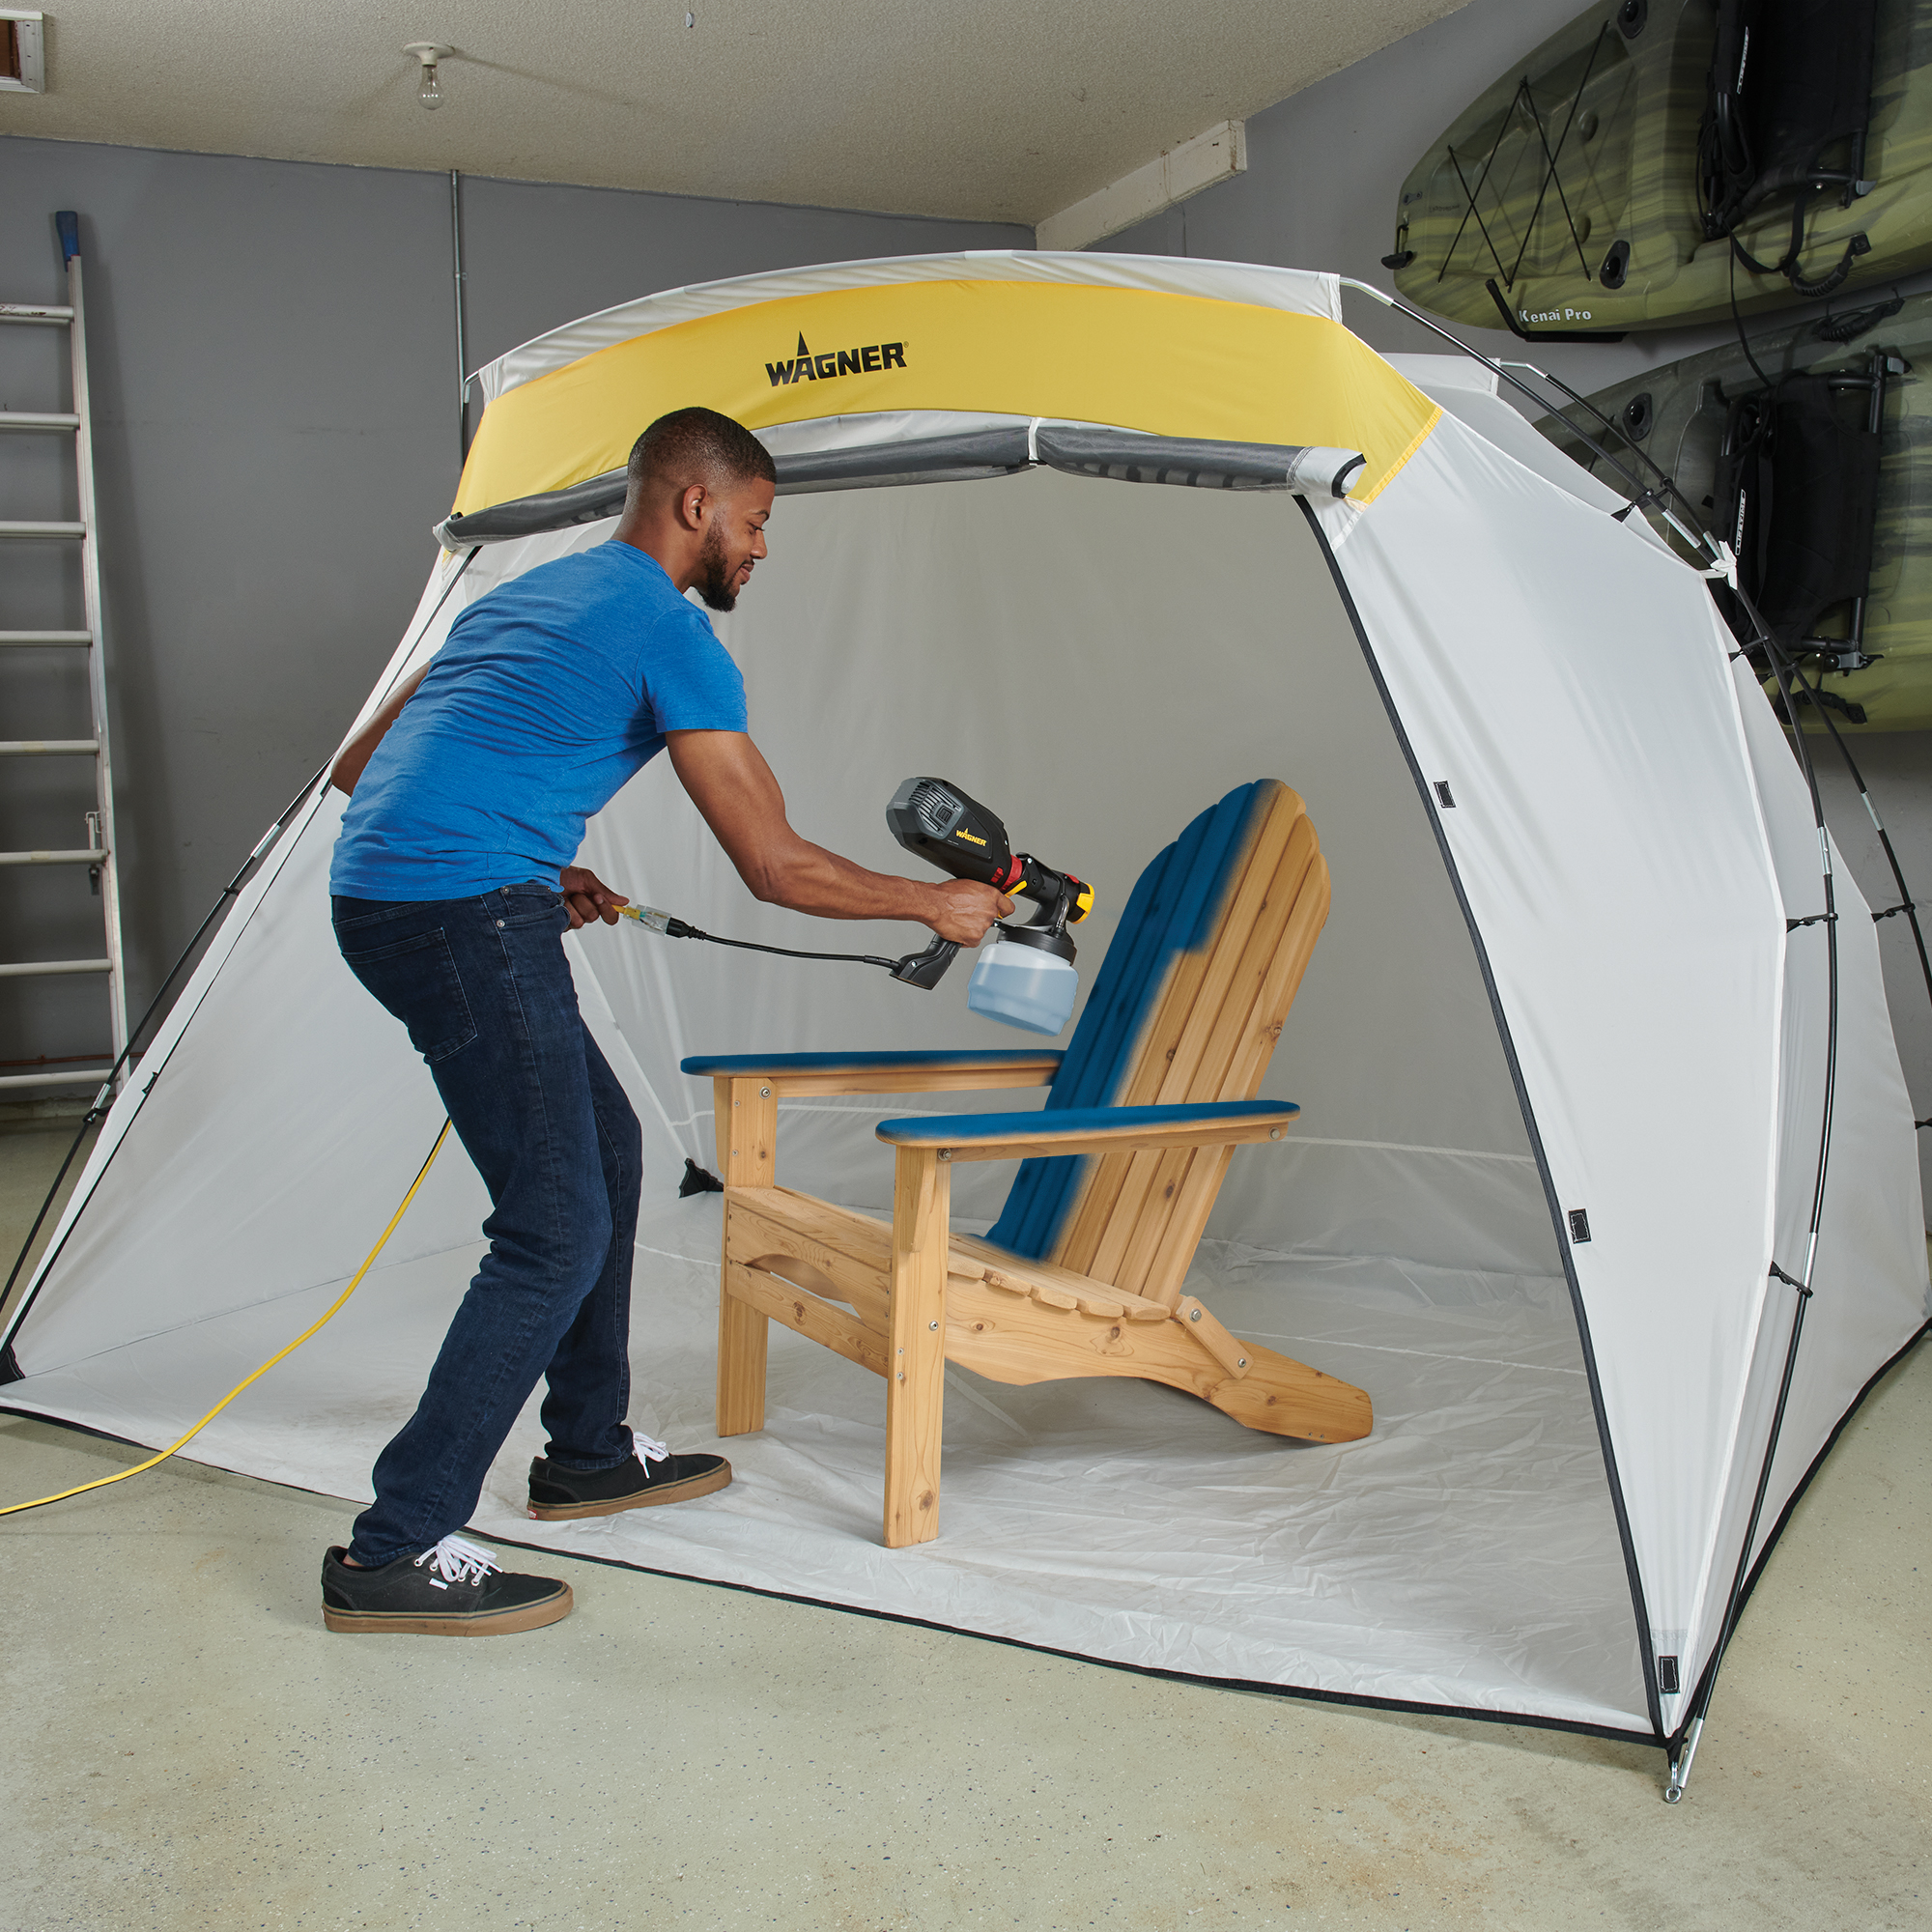 Wagner Large Spray Shelter, Portable Paint Booth for DIY Paint